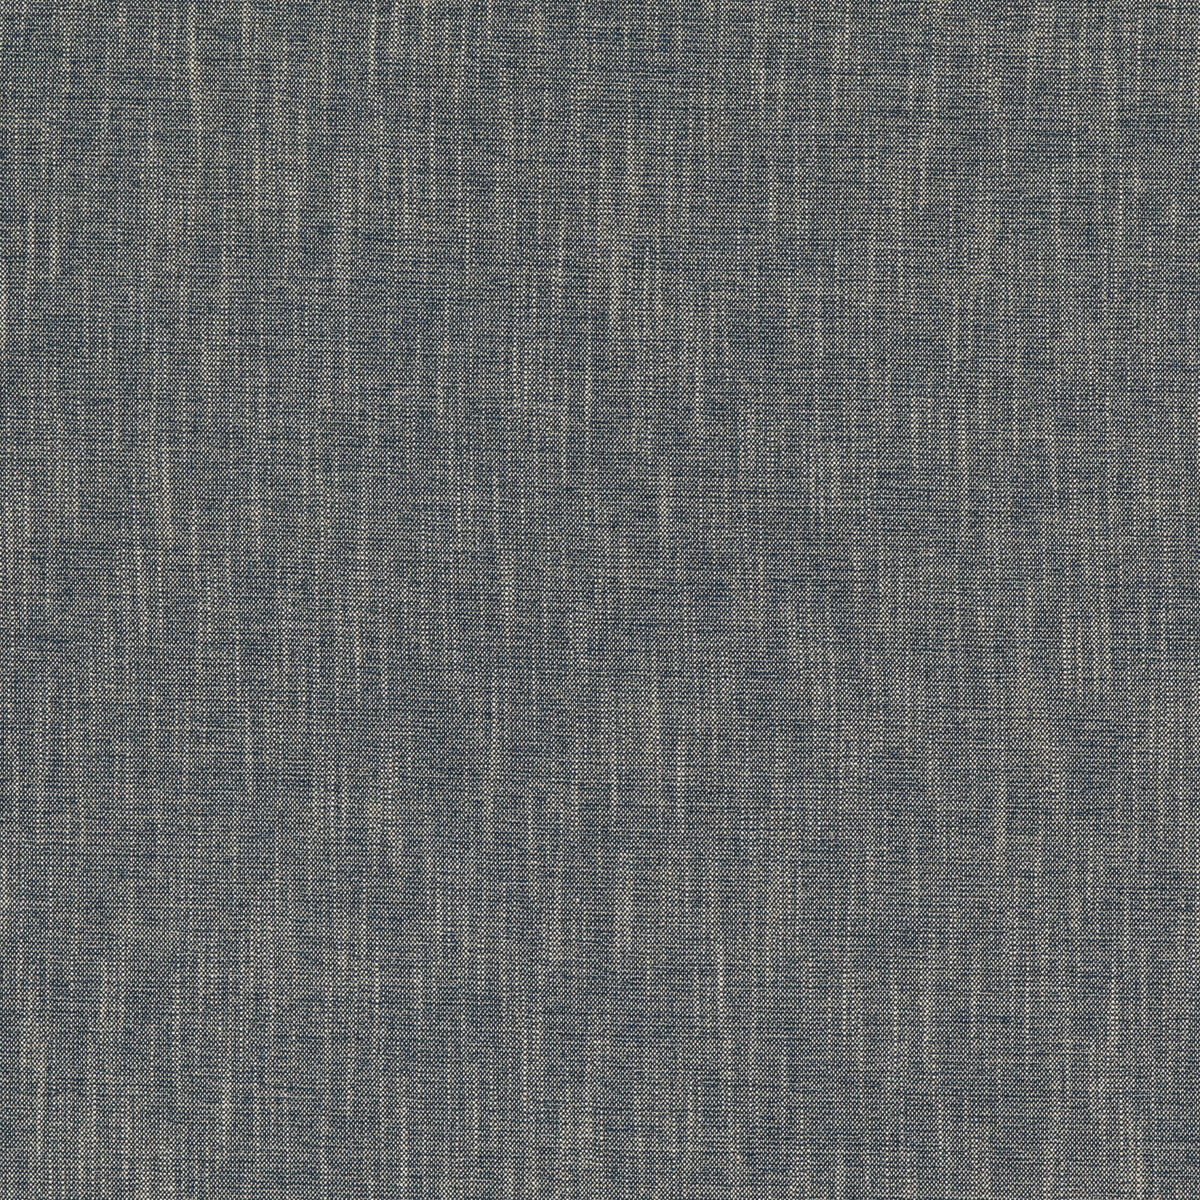 Ramble fabric in indigo color - pattern PF50485.680.0 - by Baker Lifestyle in the Block Weaves collection